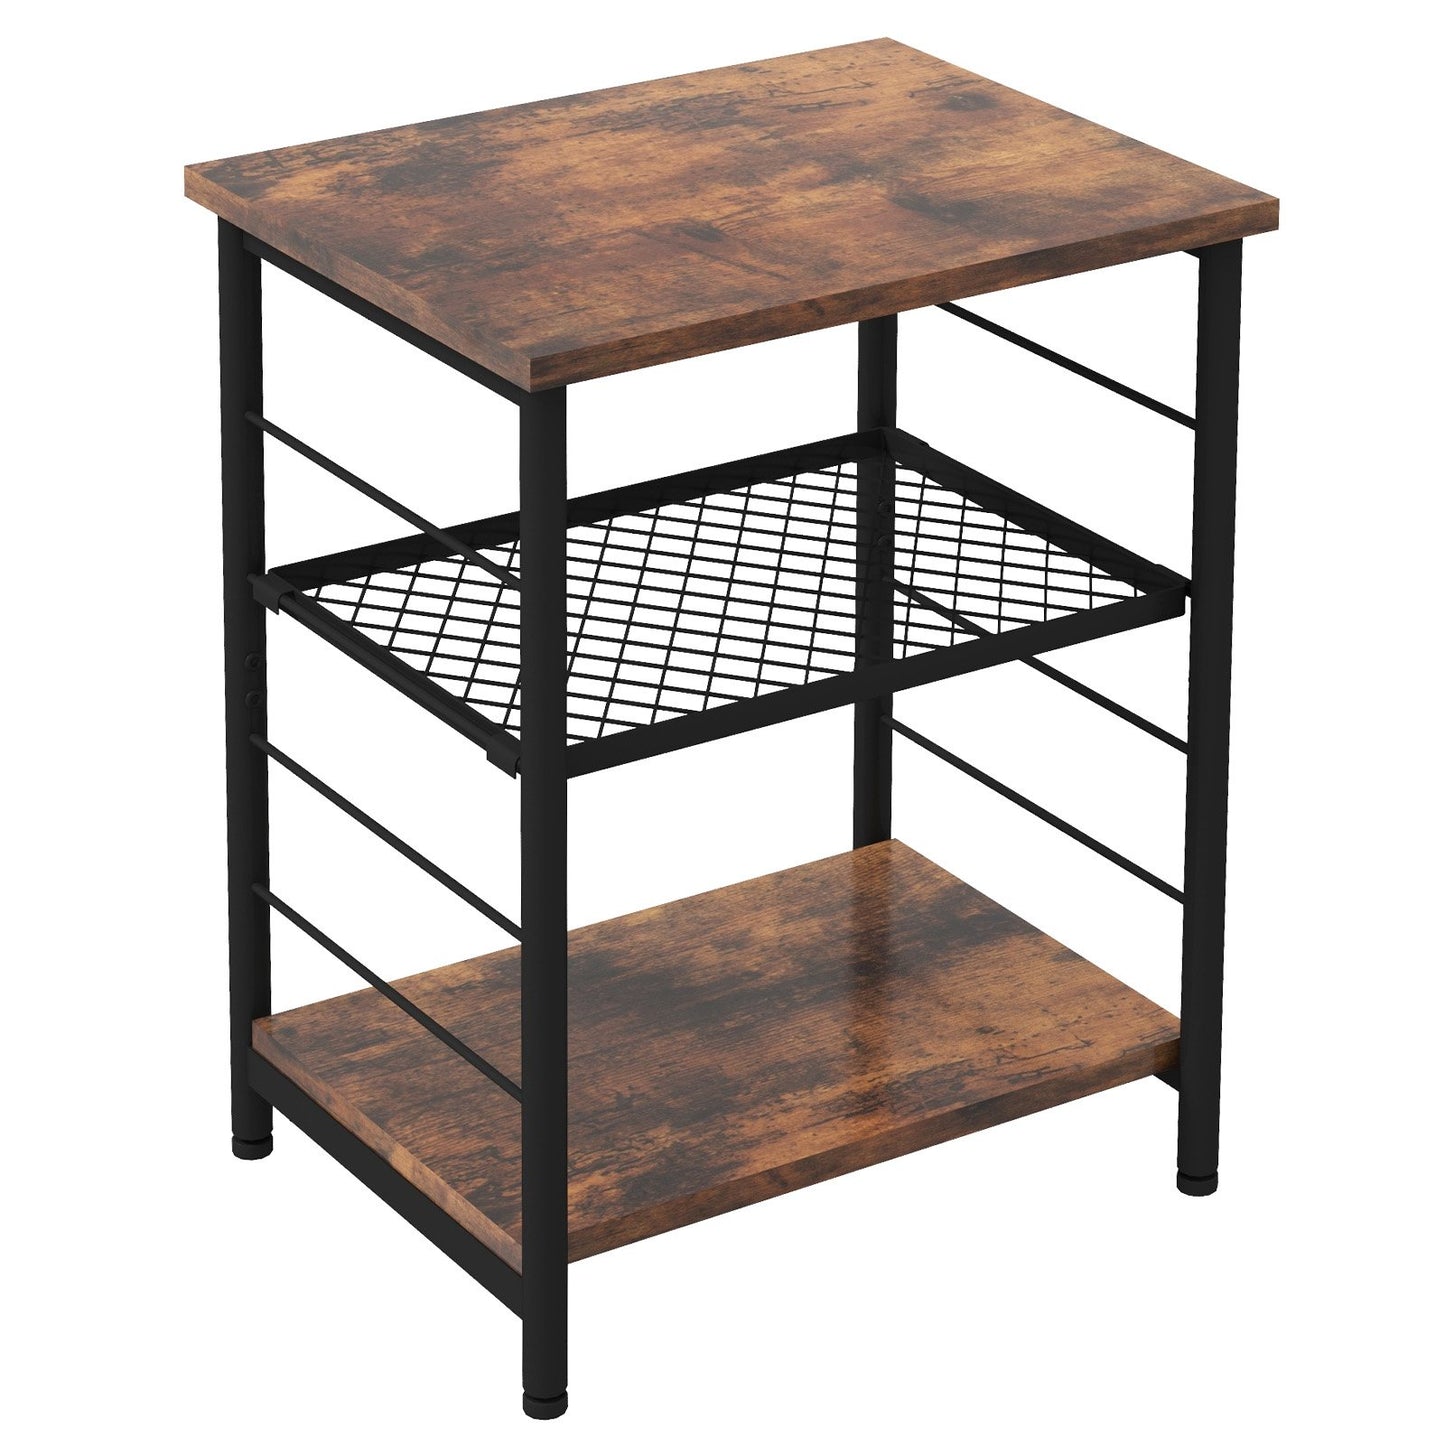 3-Tier Industrial Side Table with Adjustable Mesh Shelf, Rustic Brown